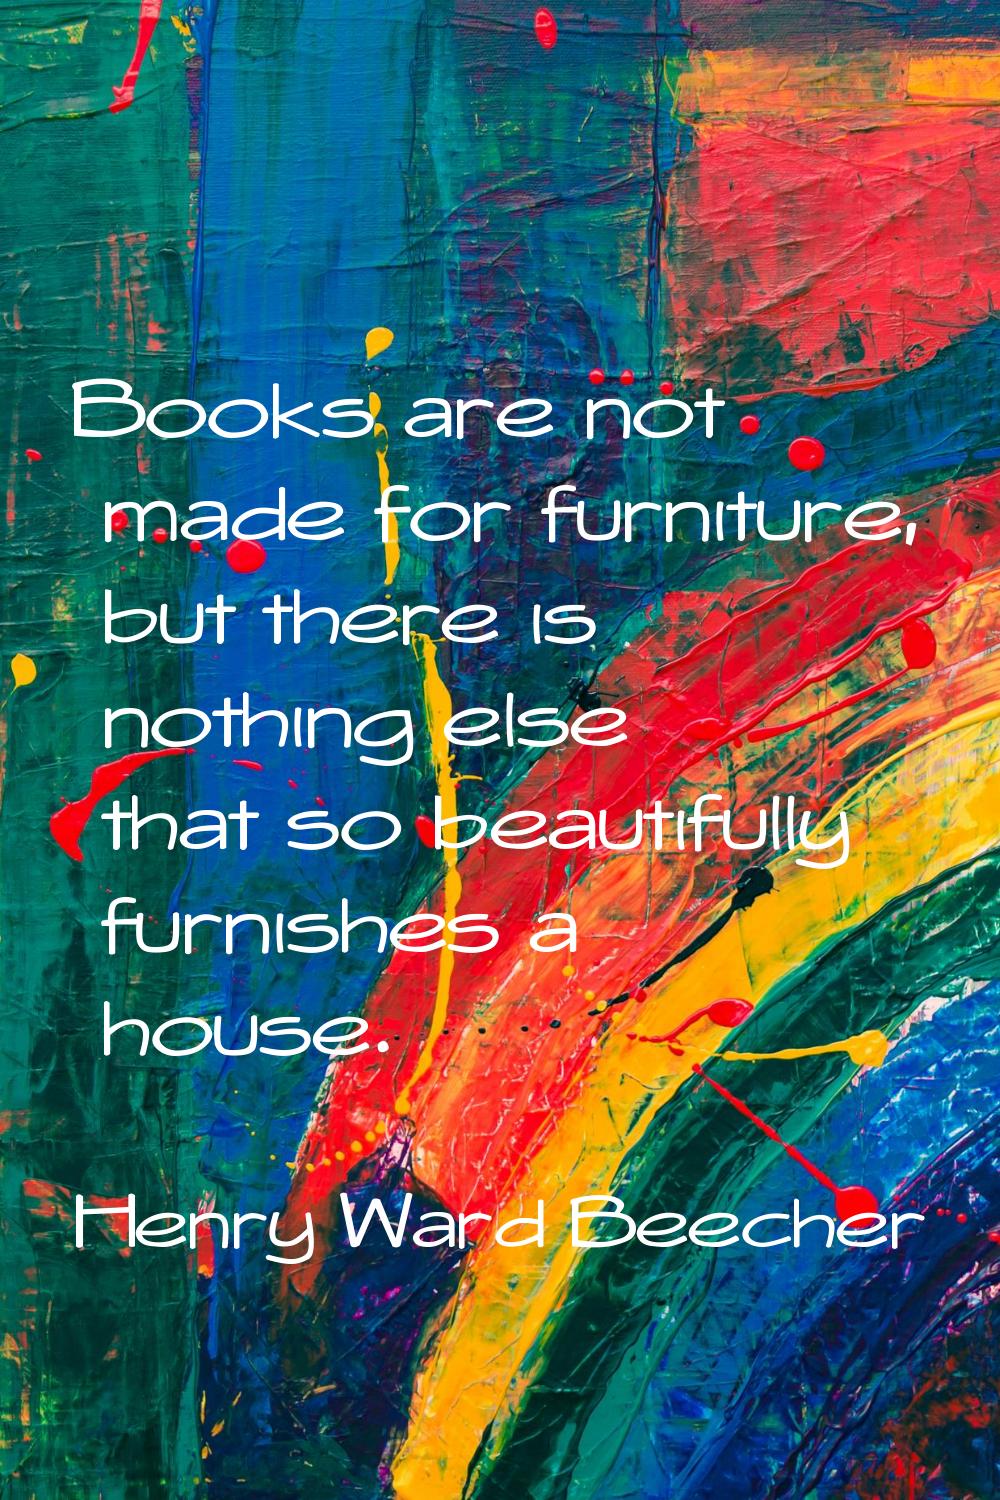 Books are not made for furniture, but there is nothing else that so beautifully furnishes a house.